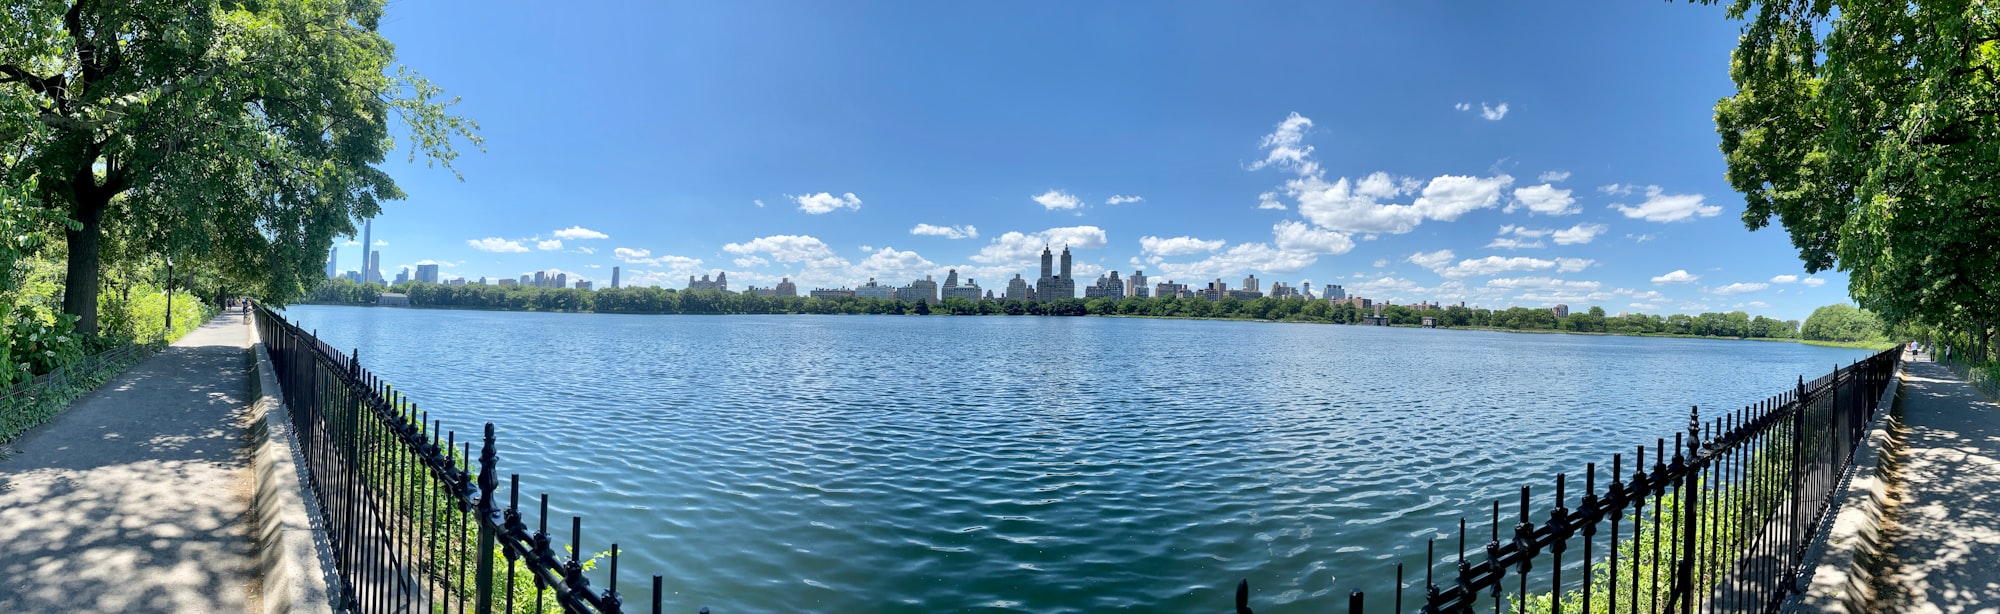 The Reservoir in Central Park. Looking to the future and after the Corona Silence. 

(Note this panorama has 12089 × 3710 resolution when downloaded)